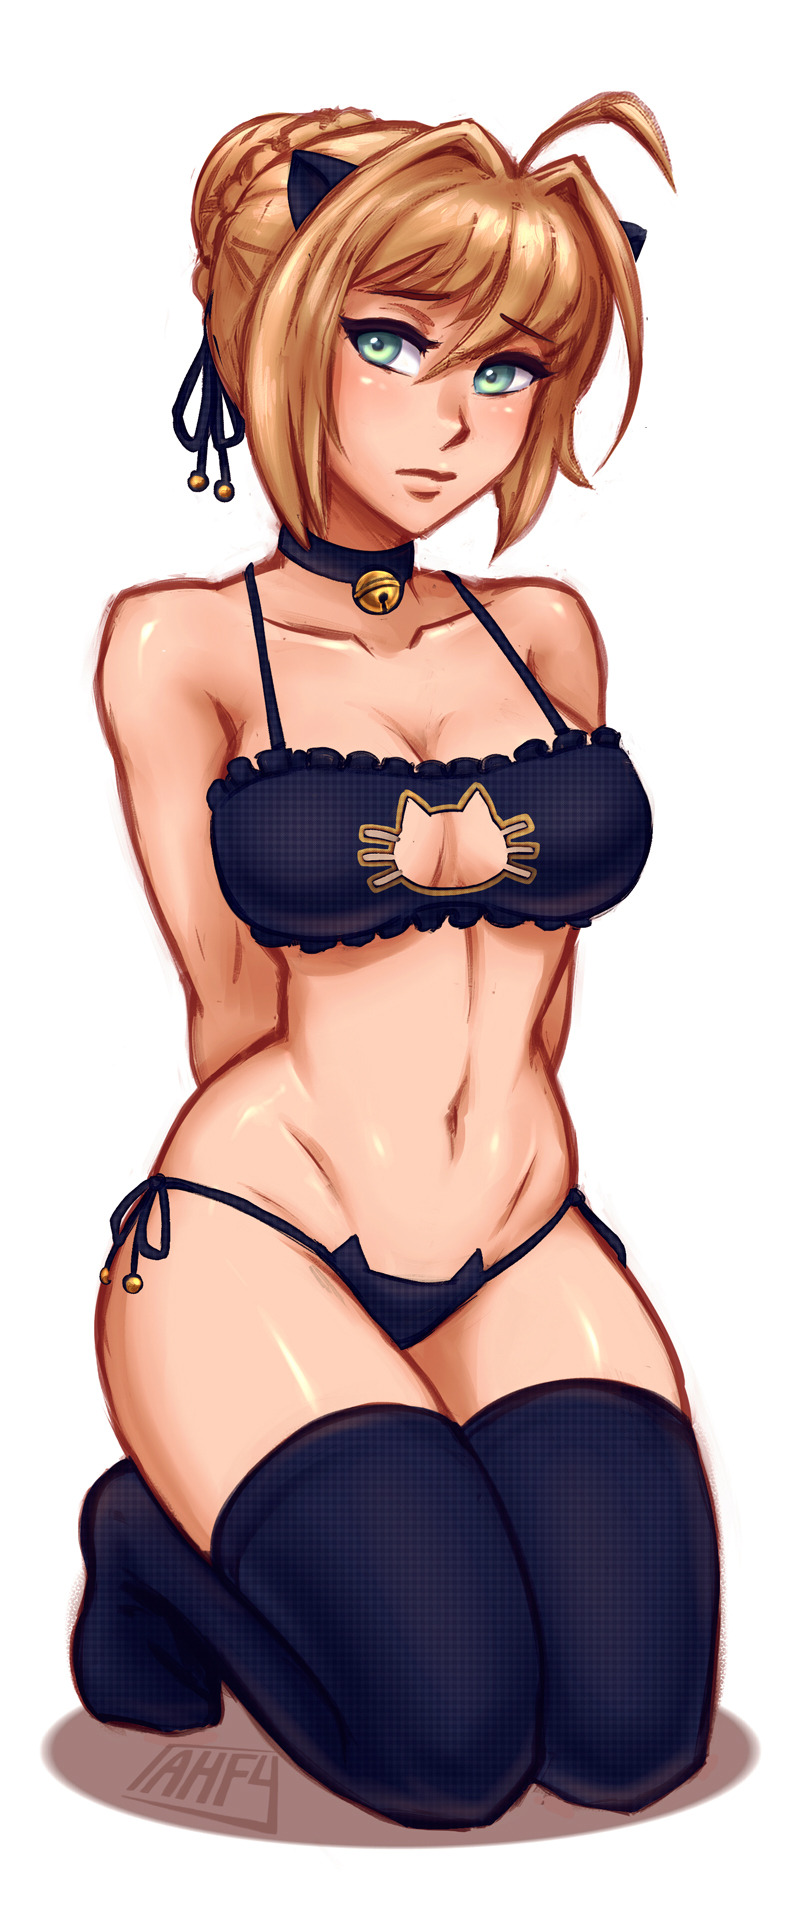 saber from fate/stay night pinup commish! I enjoyed drawing the outfits (•̀ᴗ•́)و